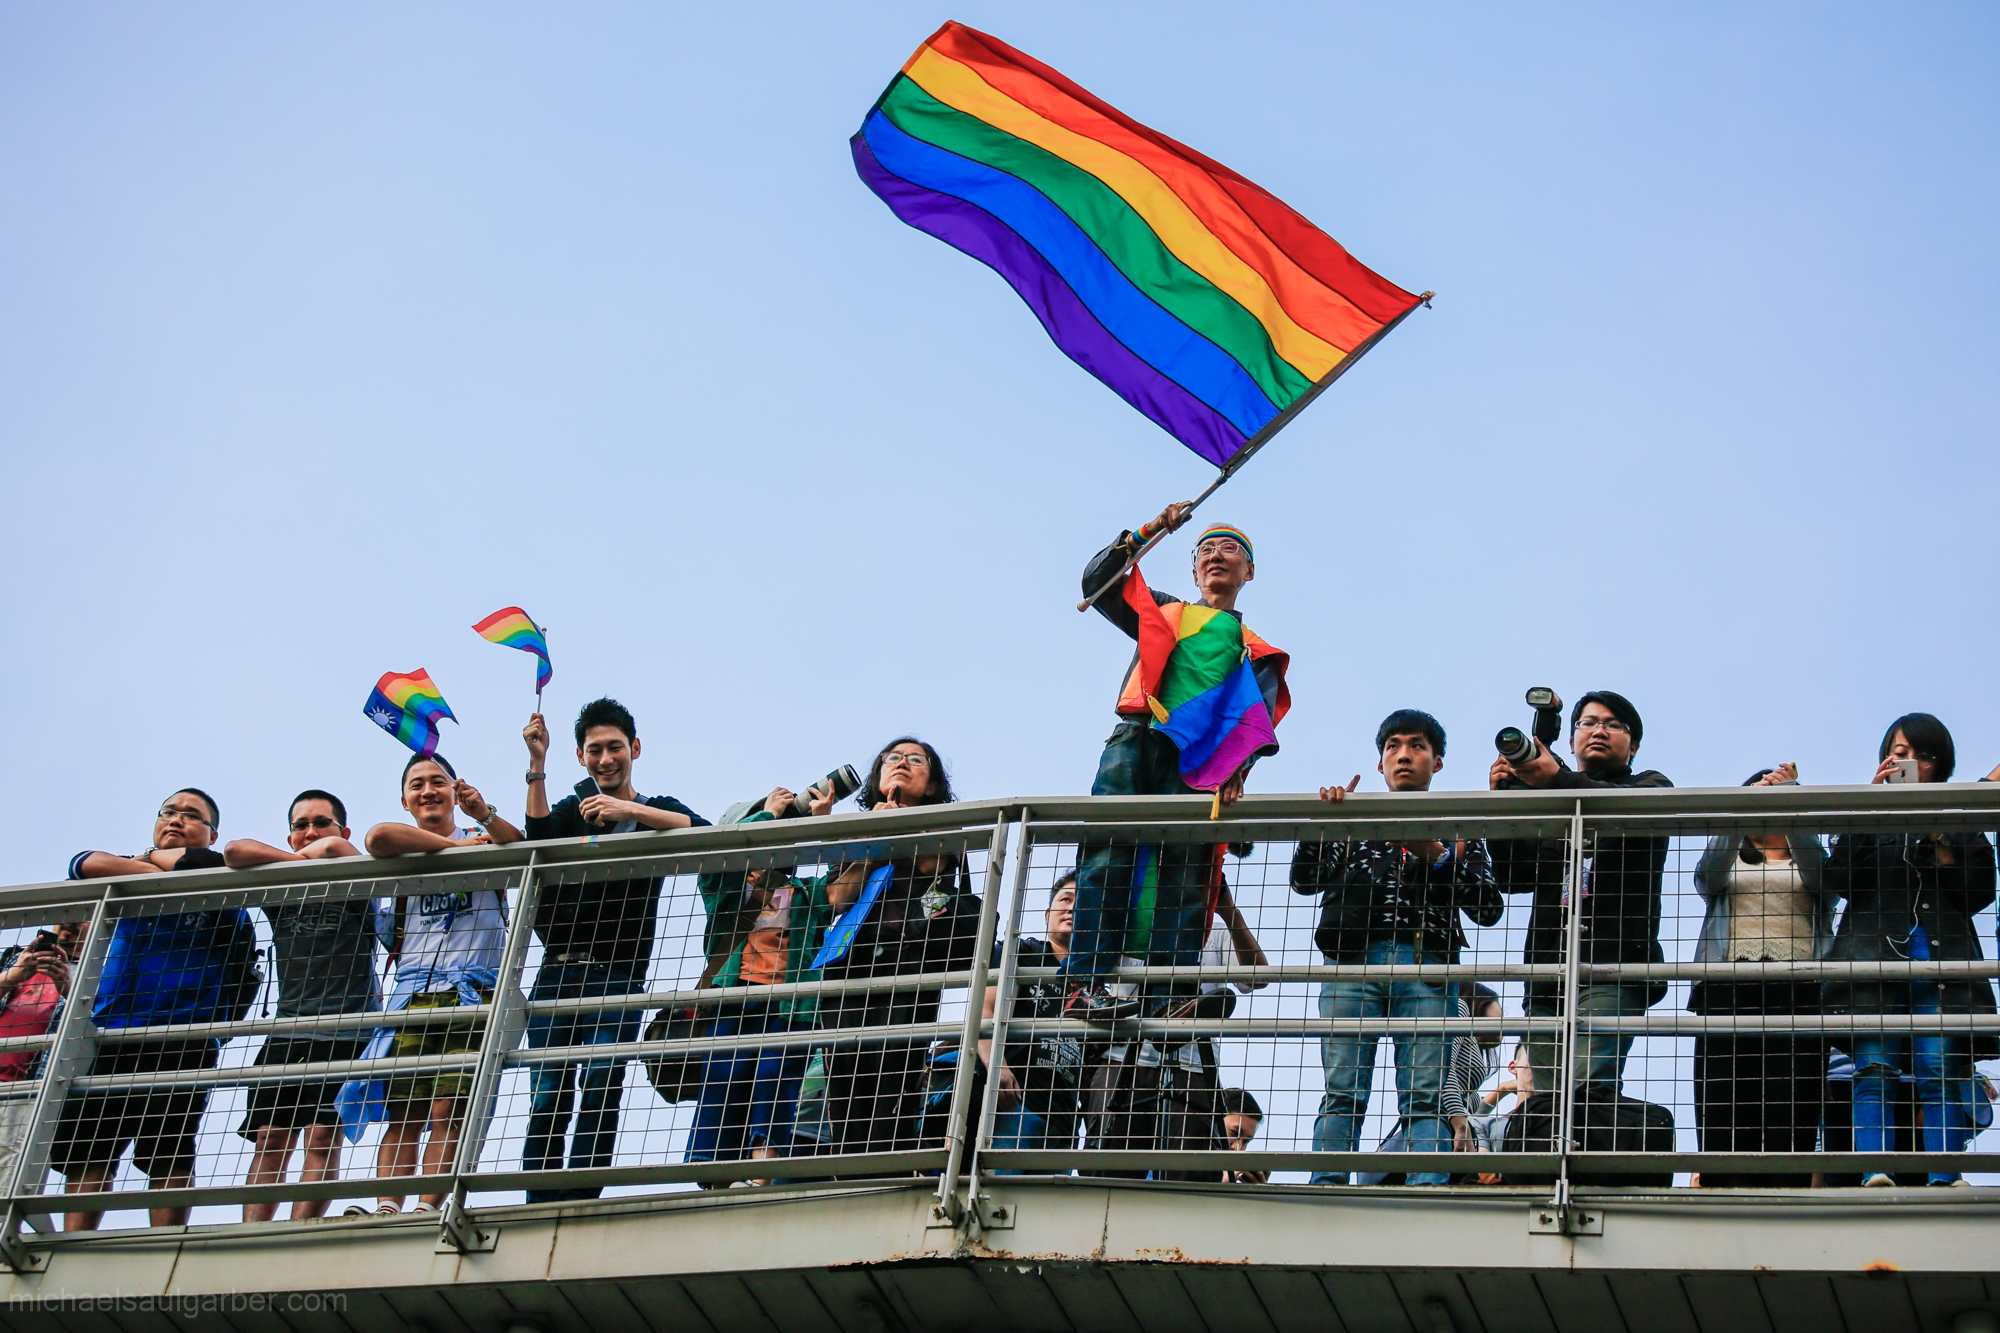 Chi Chia-wei in 2017. In May of that year, the high court ruled in his favor in a lawsuit to legalize same-sex marriage in Taiwan. Taiwan Pride, 2017